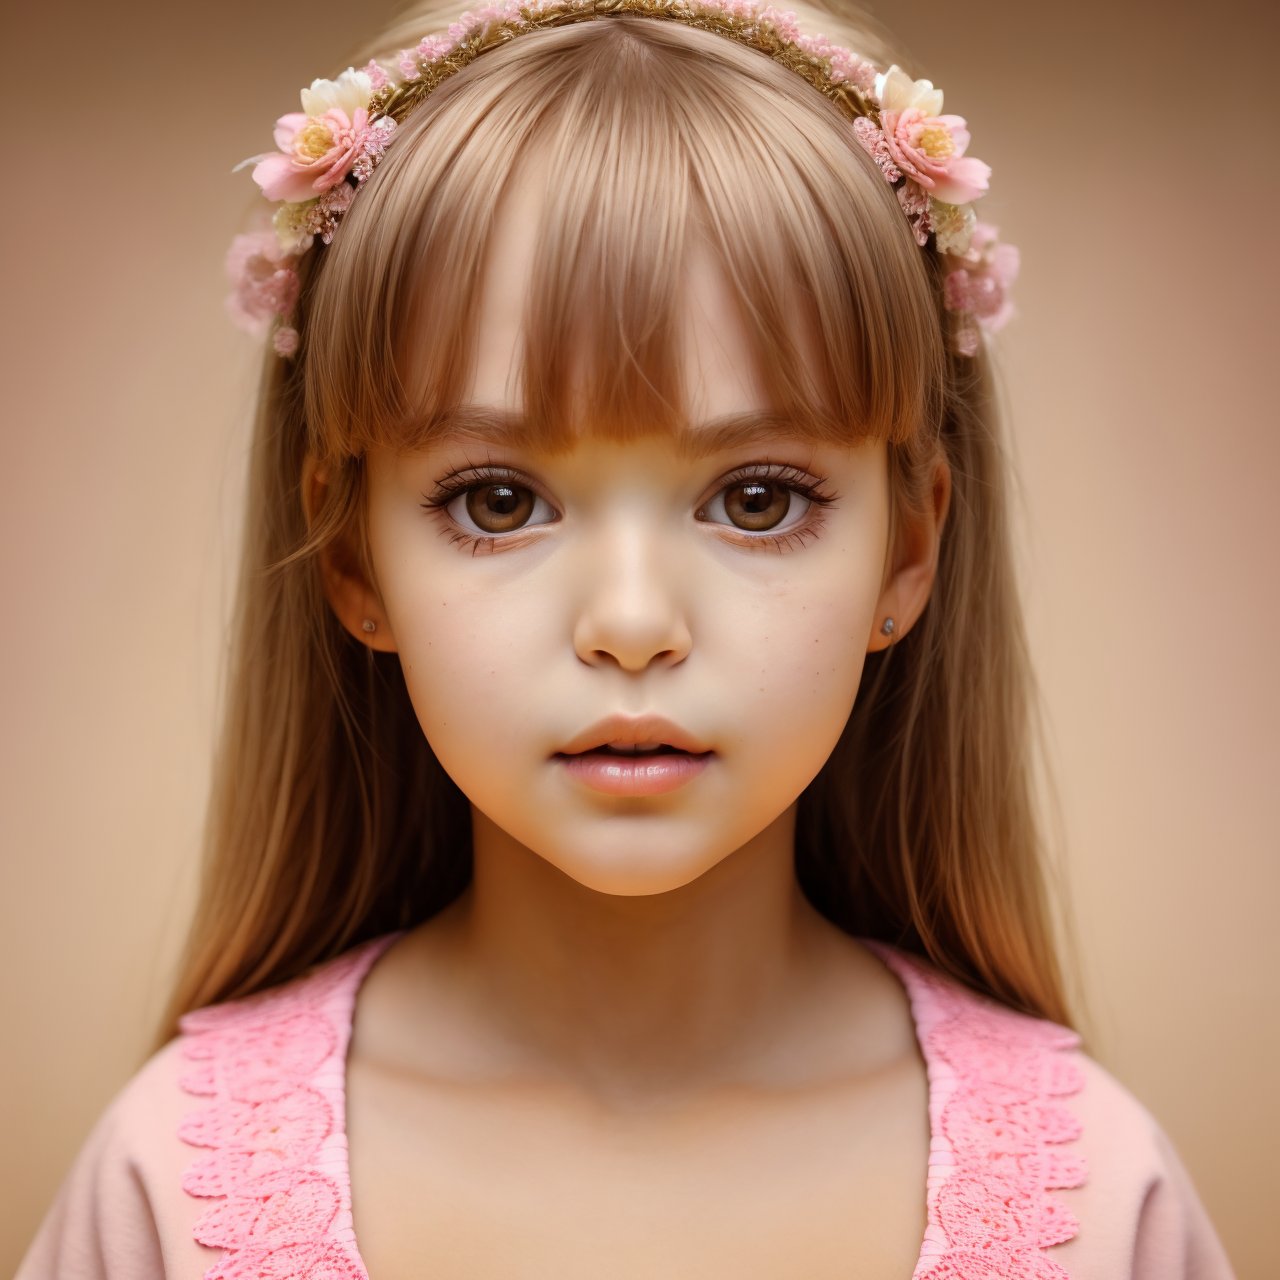 SFW, (masterpiece:1.3), best quality, view from above, close up portrait of innocent (AIDA_LoRA_AnC:1.14) <lora:AIDA_LoRA_AnC:0.84> wearing pink shirt and posing for a picture on beige background, beautiful child, pretty face, surprised, (open mouth:1.15), cinematic, insane level of details, intricate pattern, getty images, eyes with dark iris